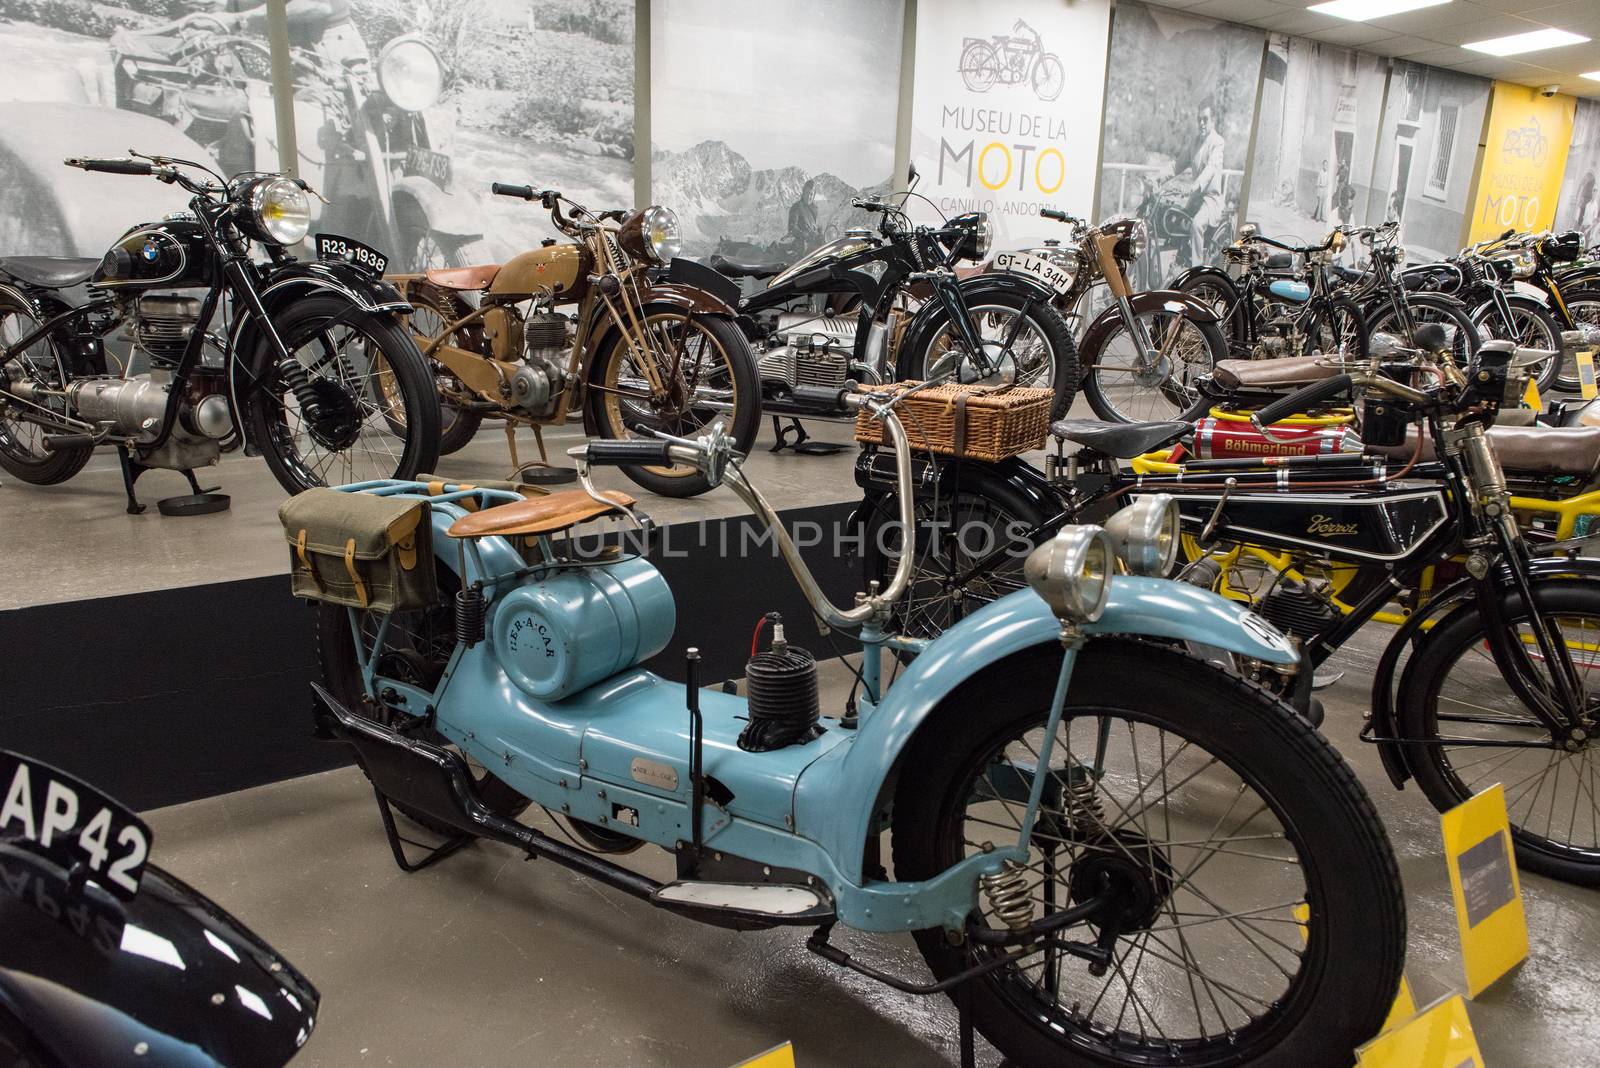 Canillo, Andorra - june 19 2020: Old motorcycles exposed on  the  Motorcyle Museum in Canillo, Andorra on June 19, 2020.